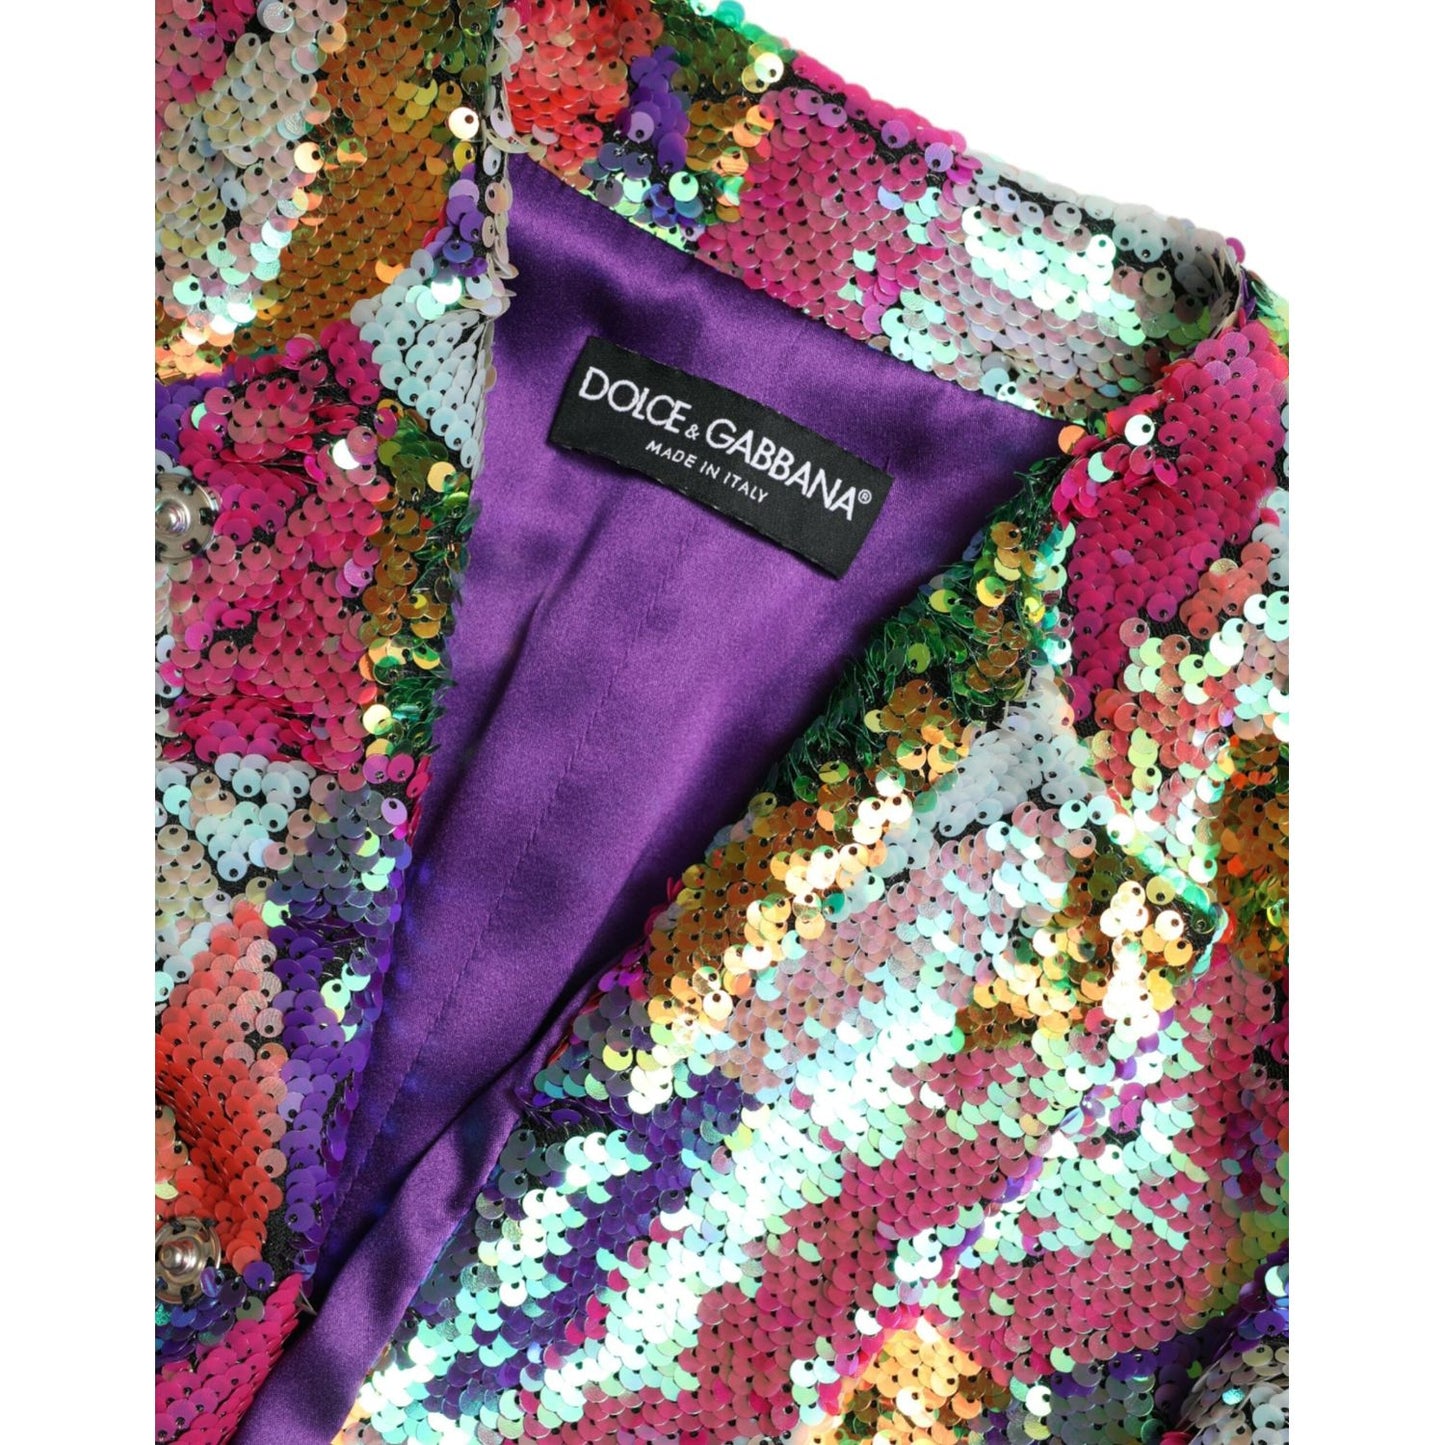 Dolce & Gabbana Multicolor Sequined Long Jacket multicolor-polyester-sequined-coat-jacket